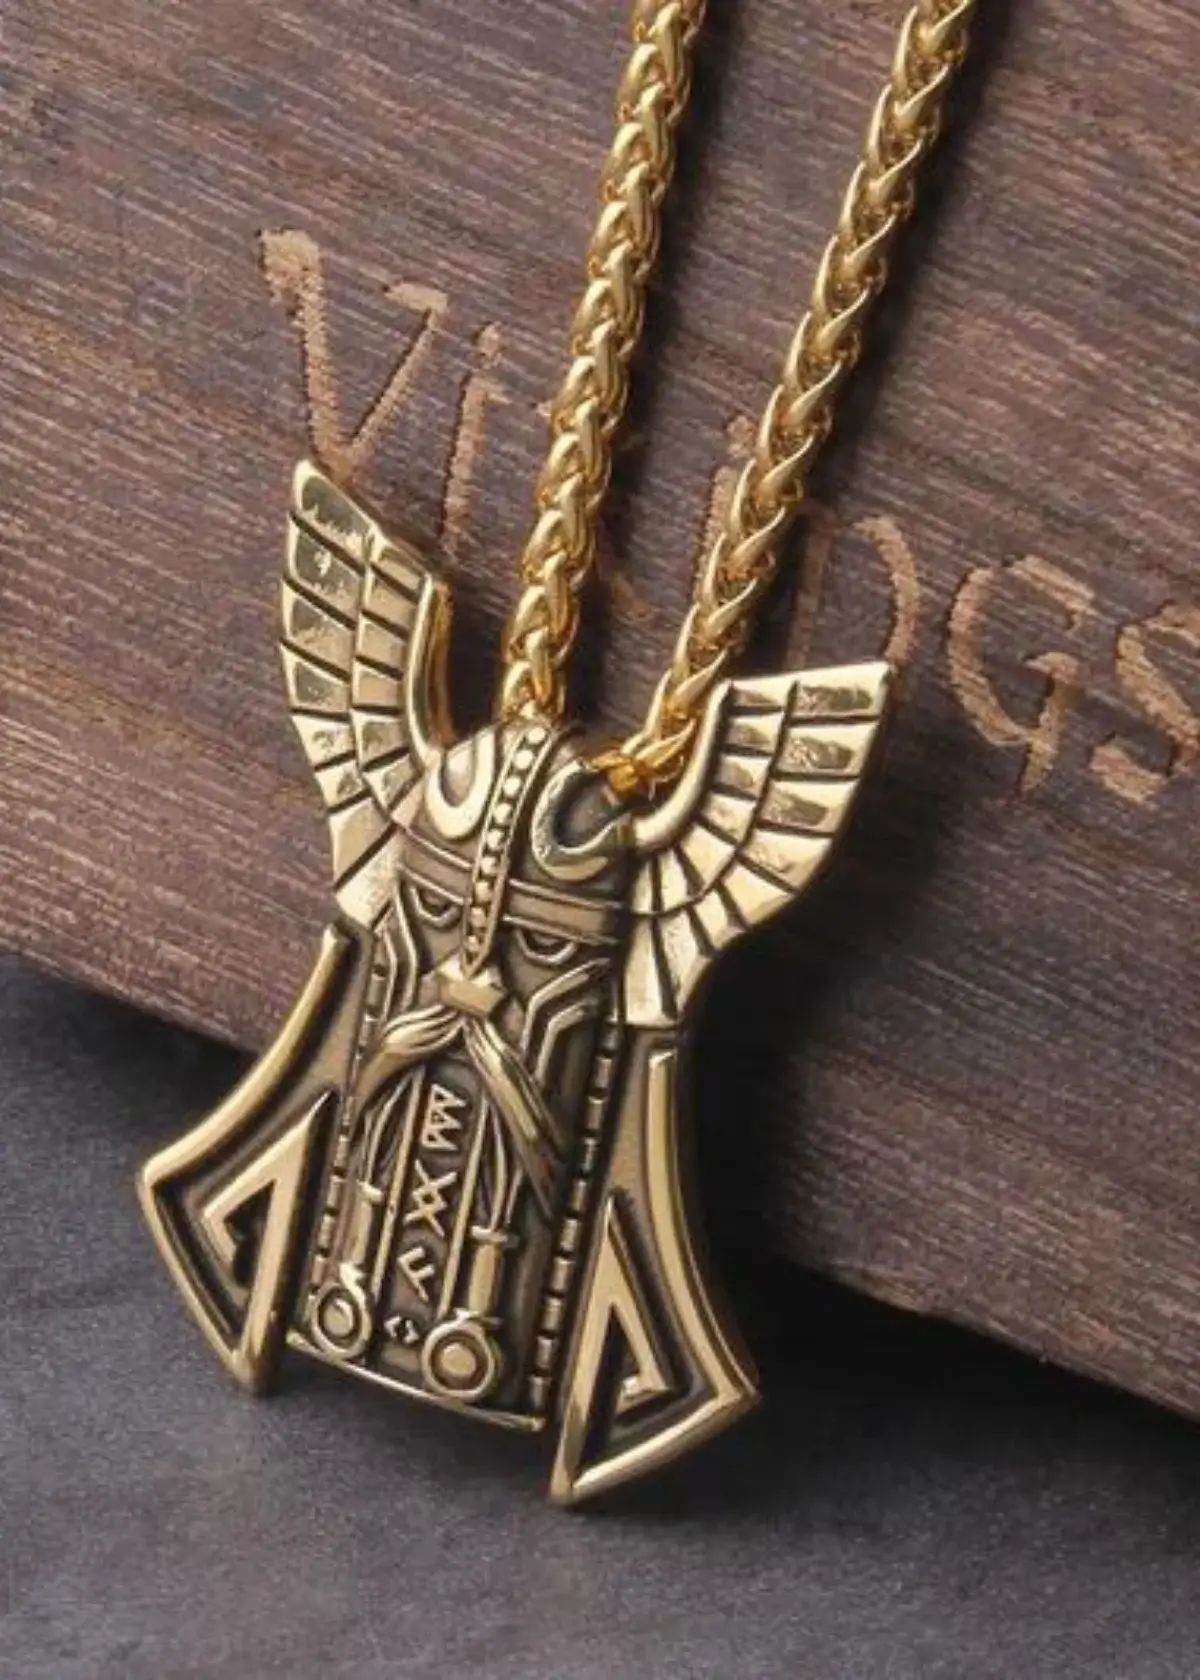 How to Choose the Right Odin Necklace?